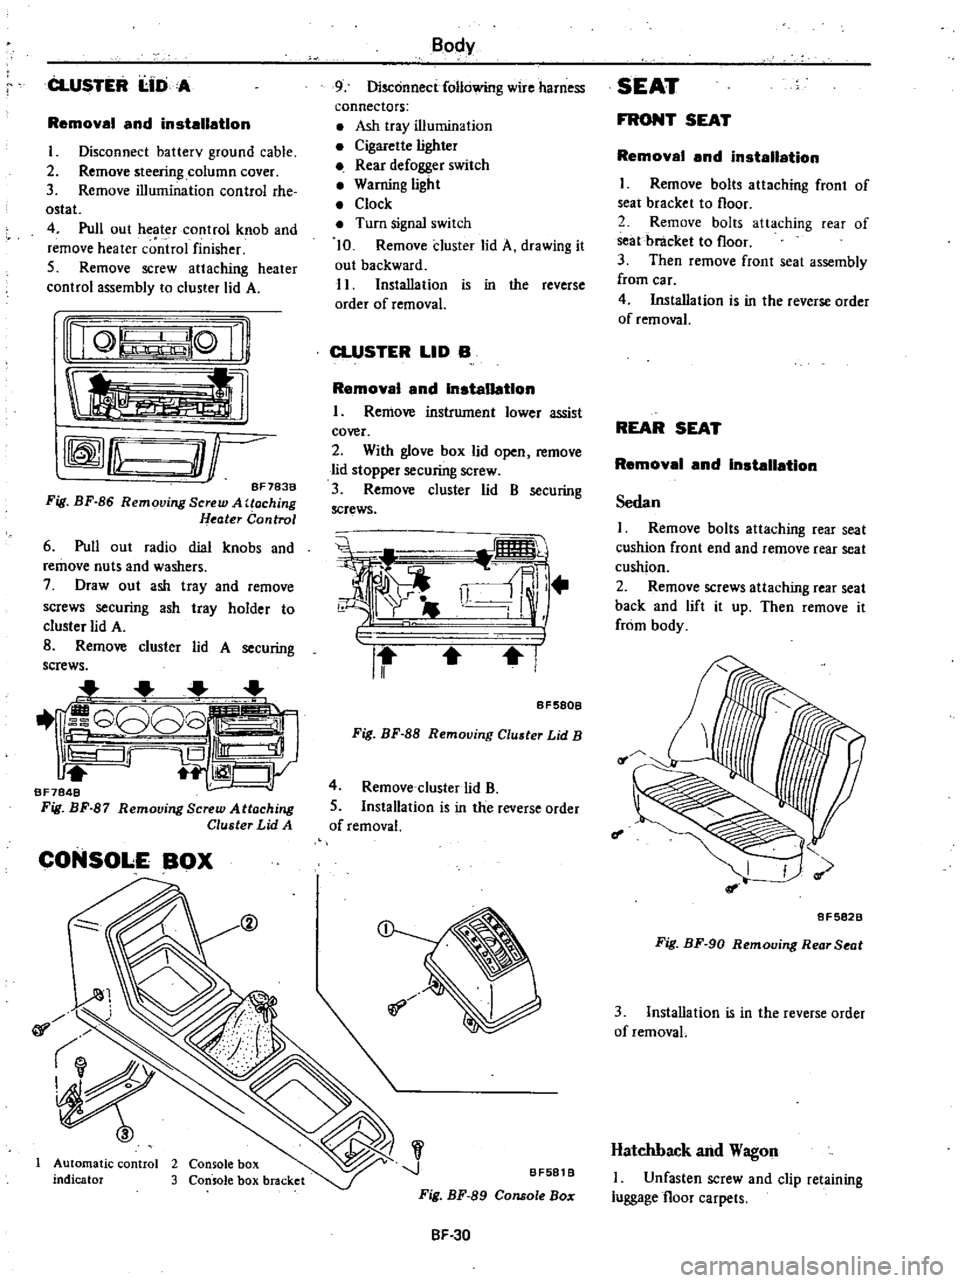 DATSUN 210 1979  Service Manual 
CLUSTER 
I 
IDA

Removal

and 
installation

I

Disconnect 
batterv

ground 
cable

2 
Remove

steering 
column

cover

3 
Remove

illumination 
control

rhe

ostat

4 
Pull 
out

heater 
control 
kn